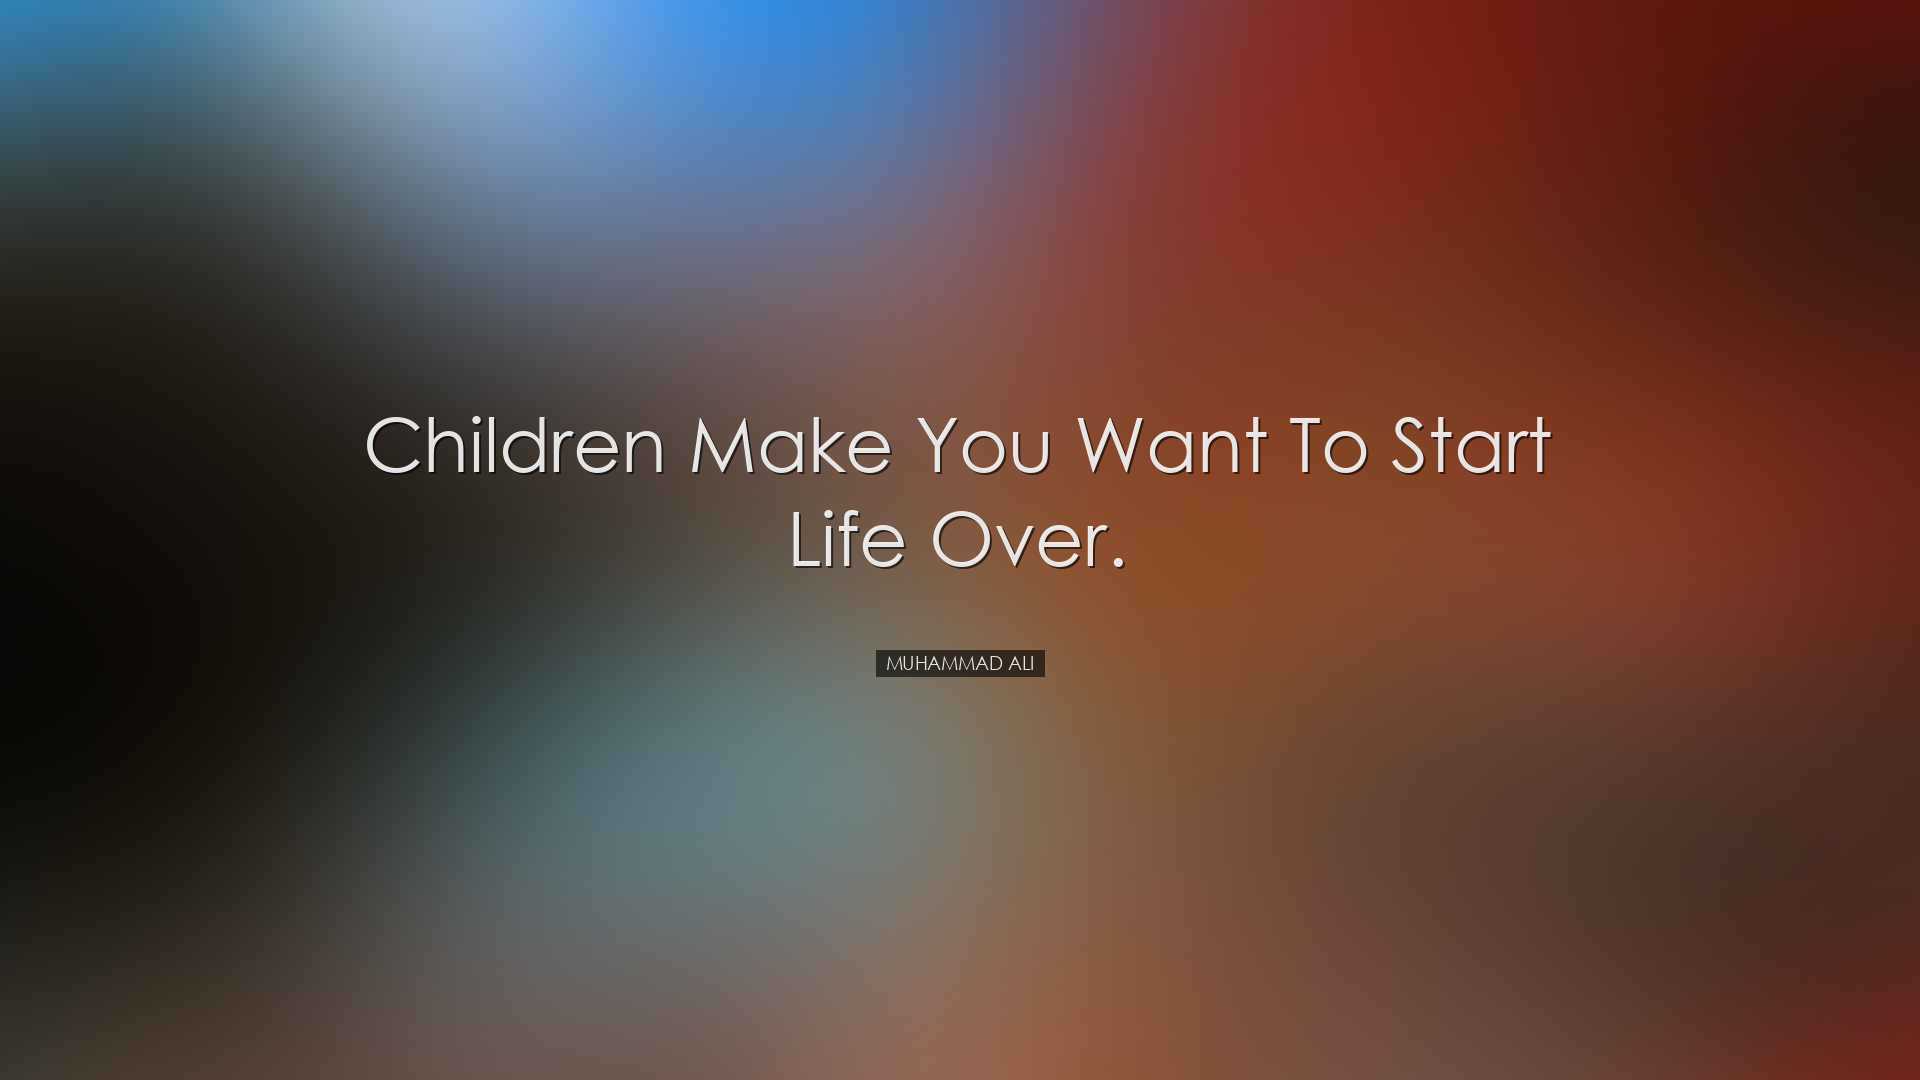 Children make you want to start life over. - Muhammad Ali